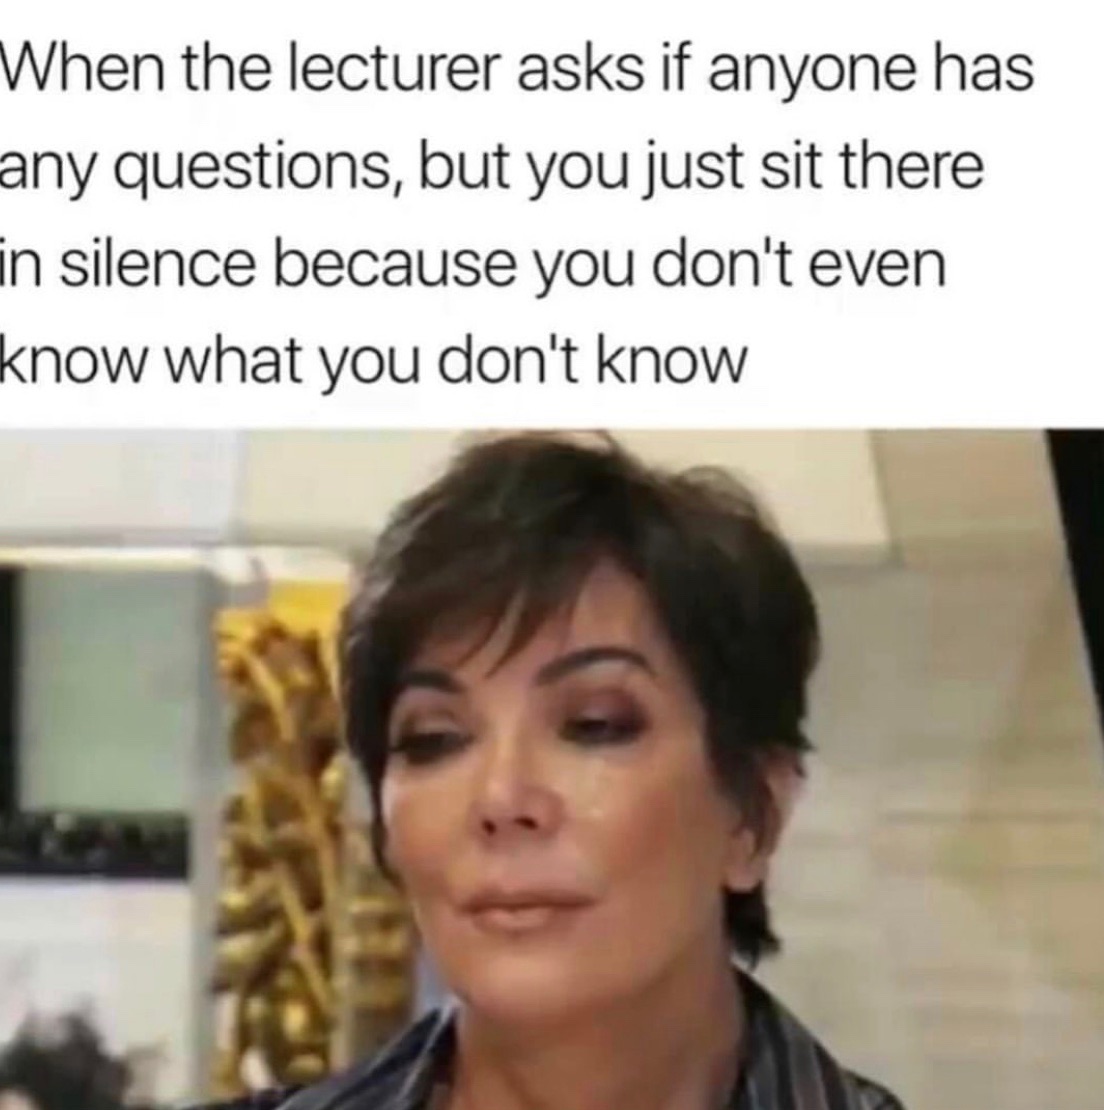 kris jenner reaction - When the lecturer asks if anyone has any questions, but you just sit there in silence because you don't even know what you don't know